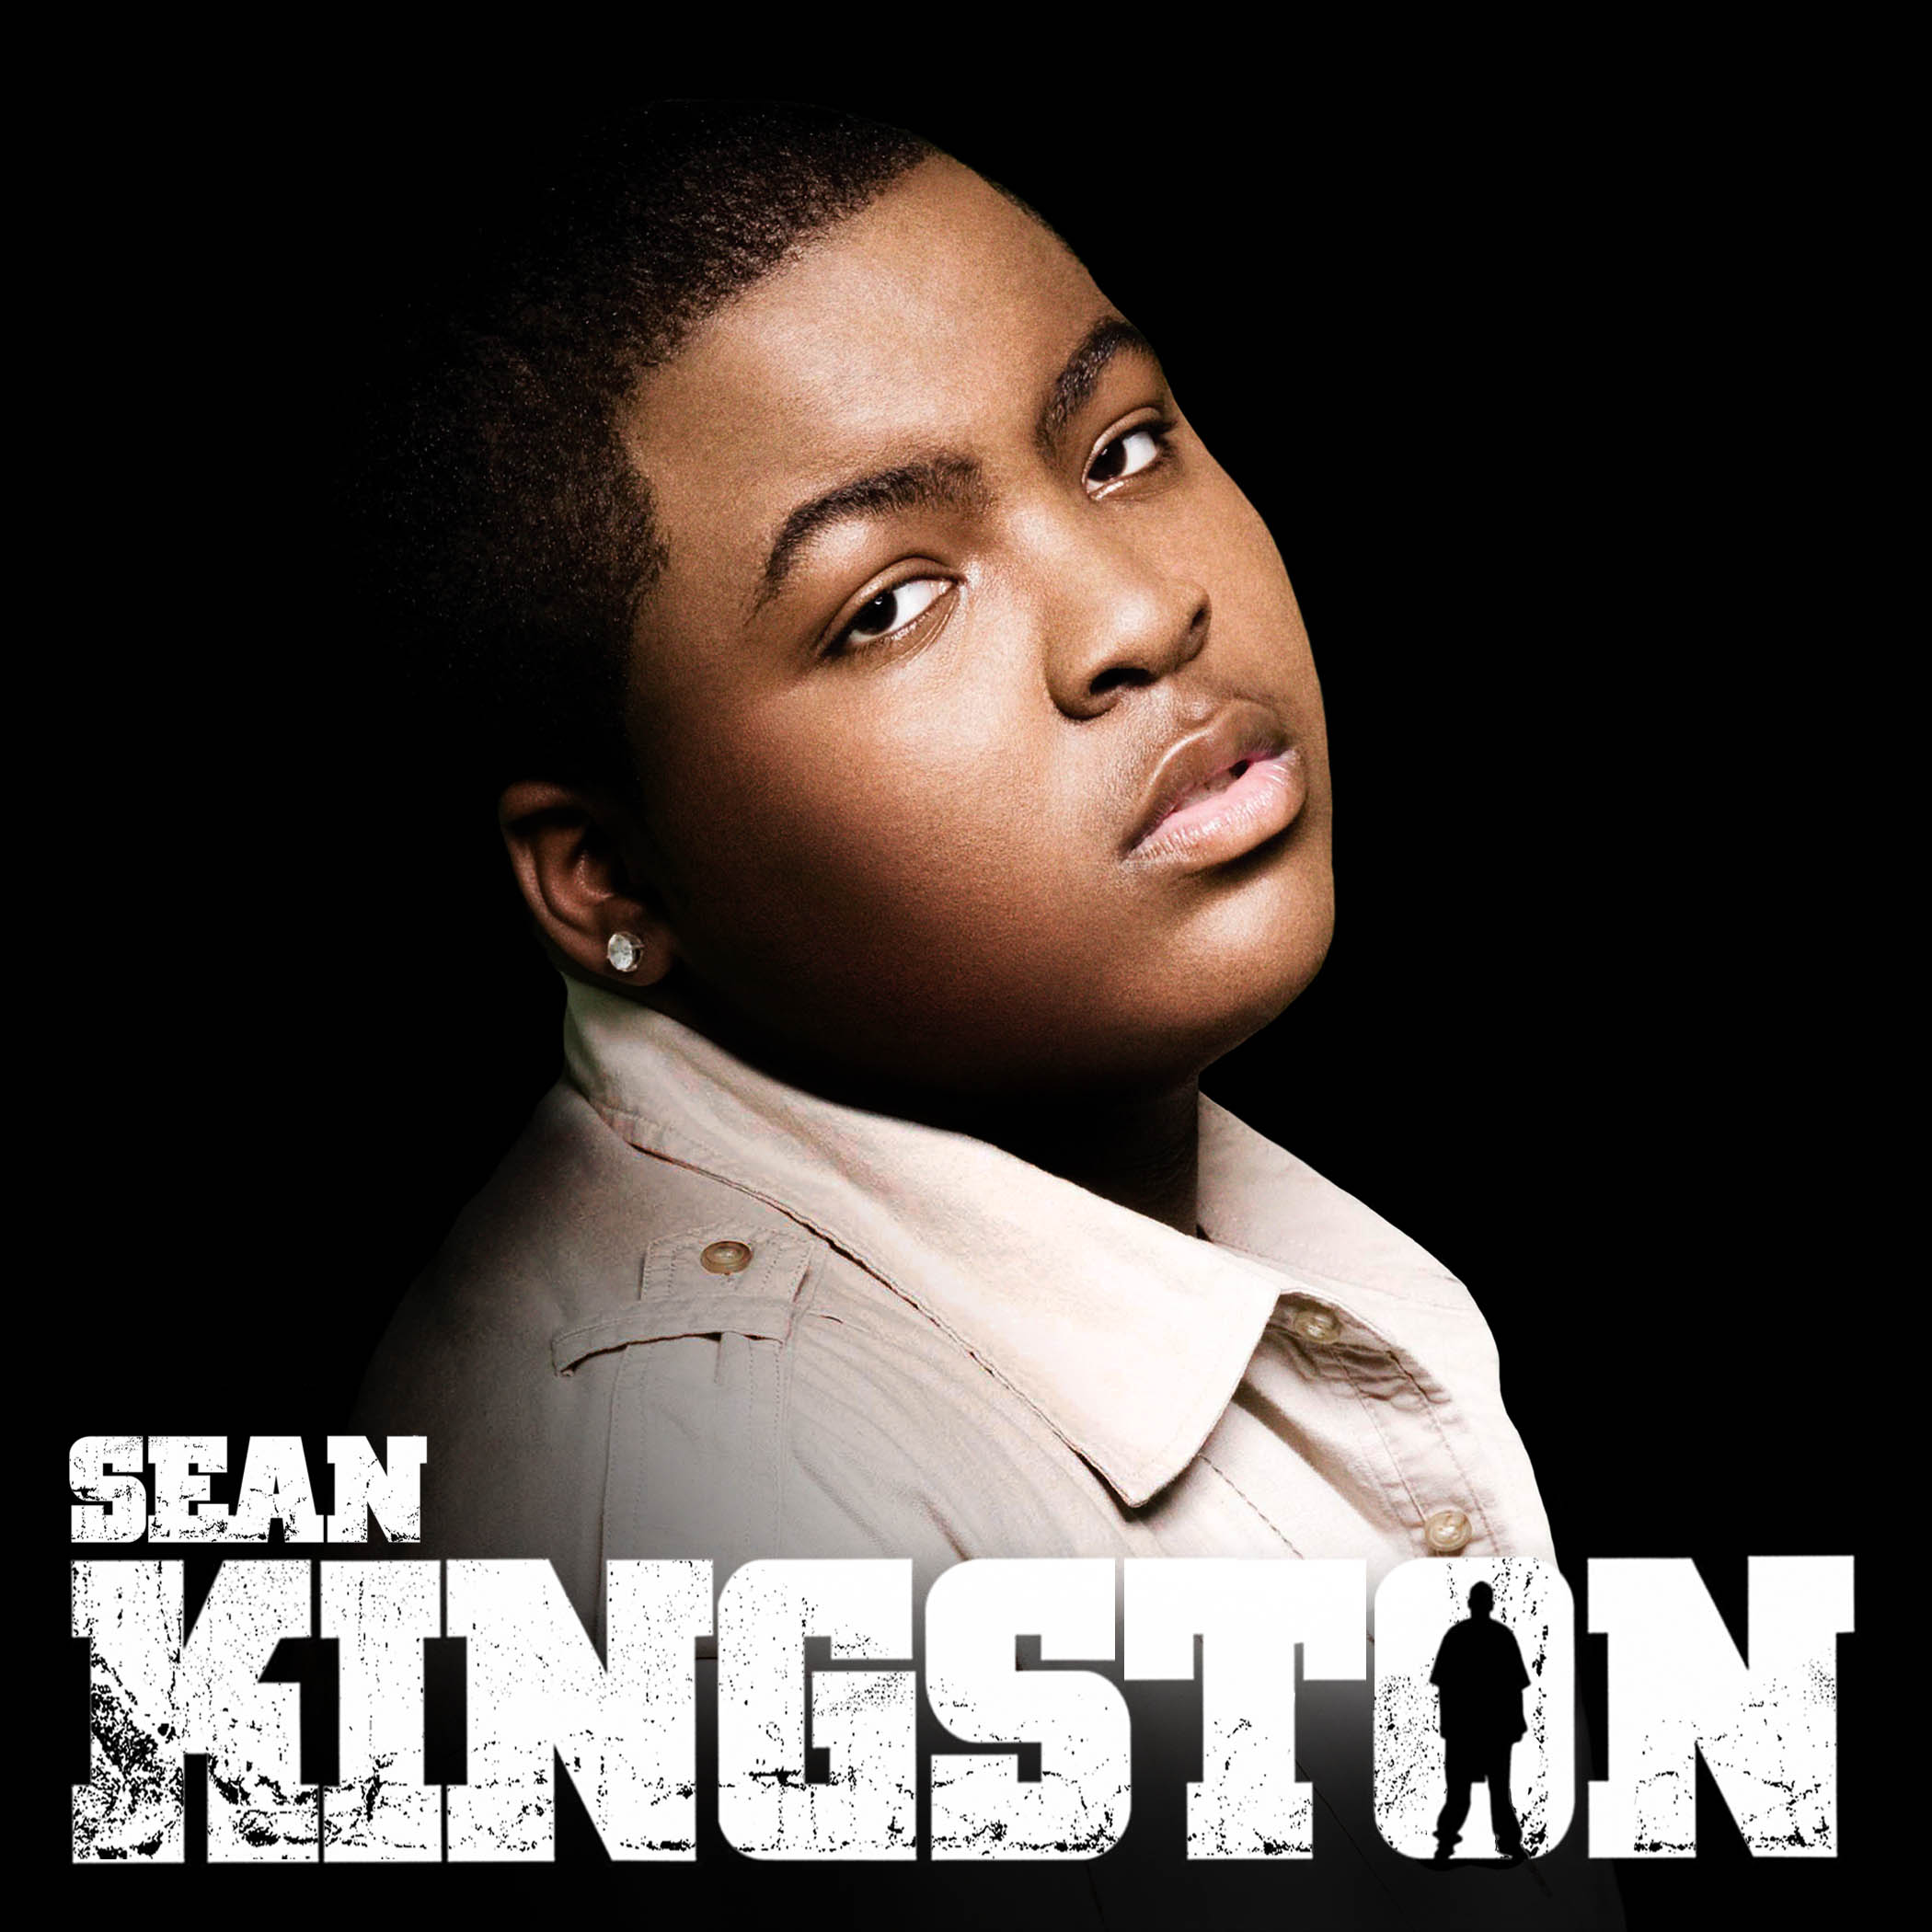 Sean Kingston – My Chain Wasn’t Snatched